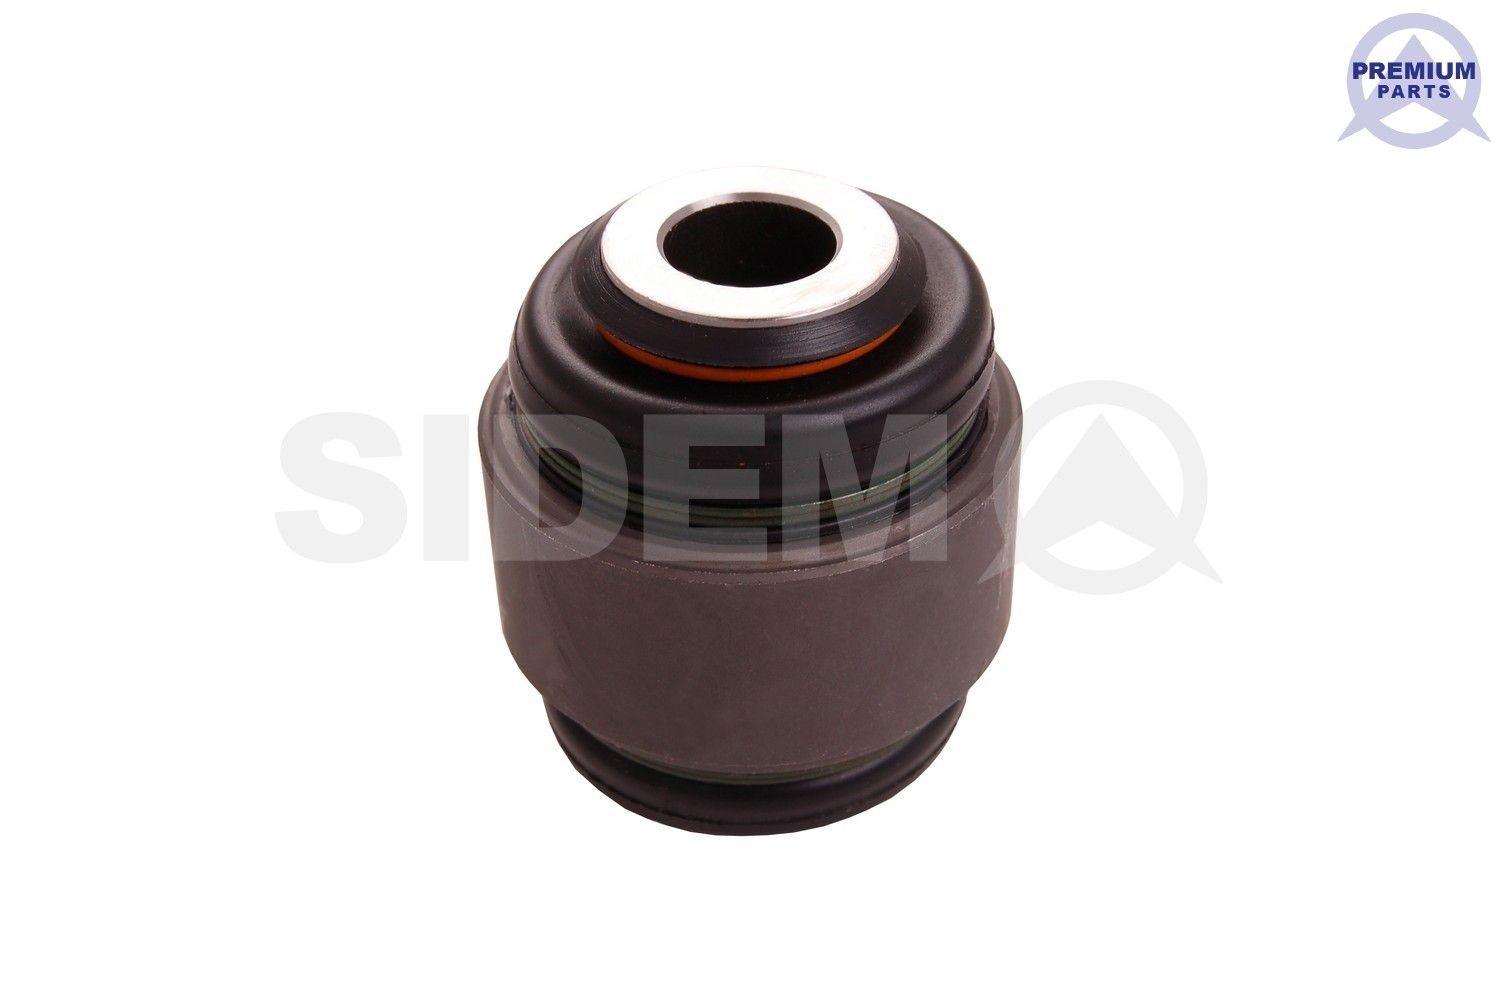 SIDEM 21580 Bearing, wheel bearing housing Requires special tools for mounting